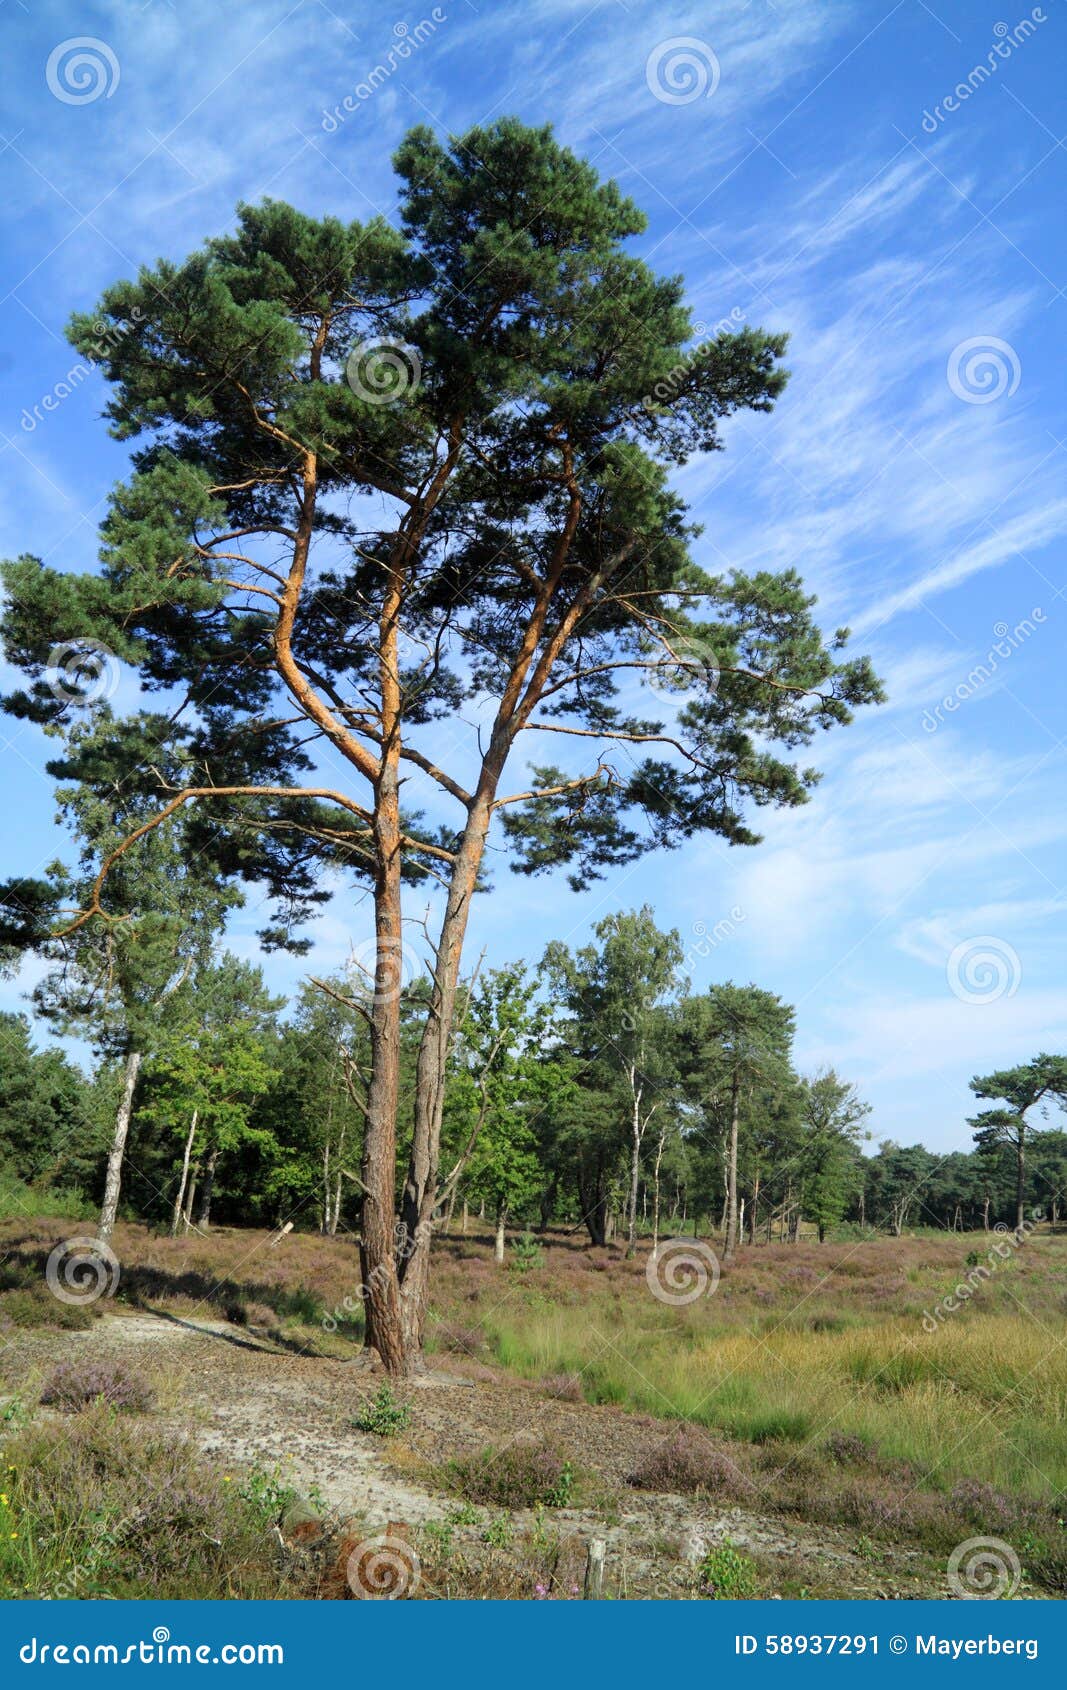 pinaceae tree and heath in europe